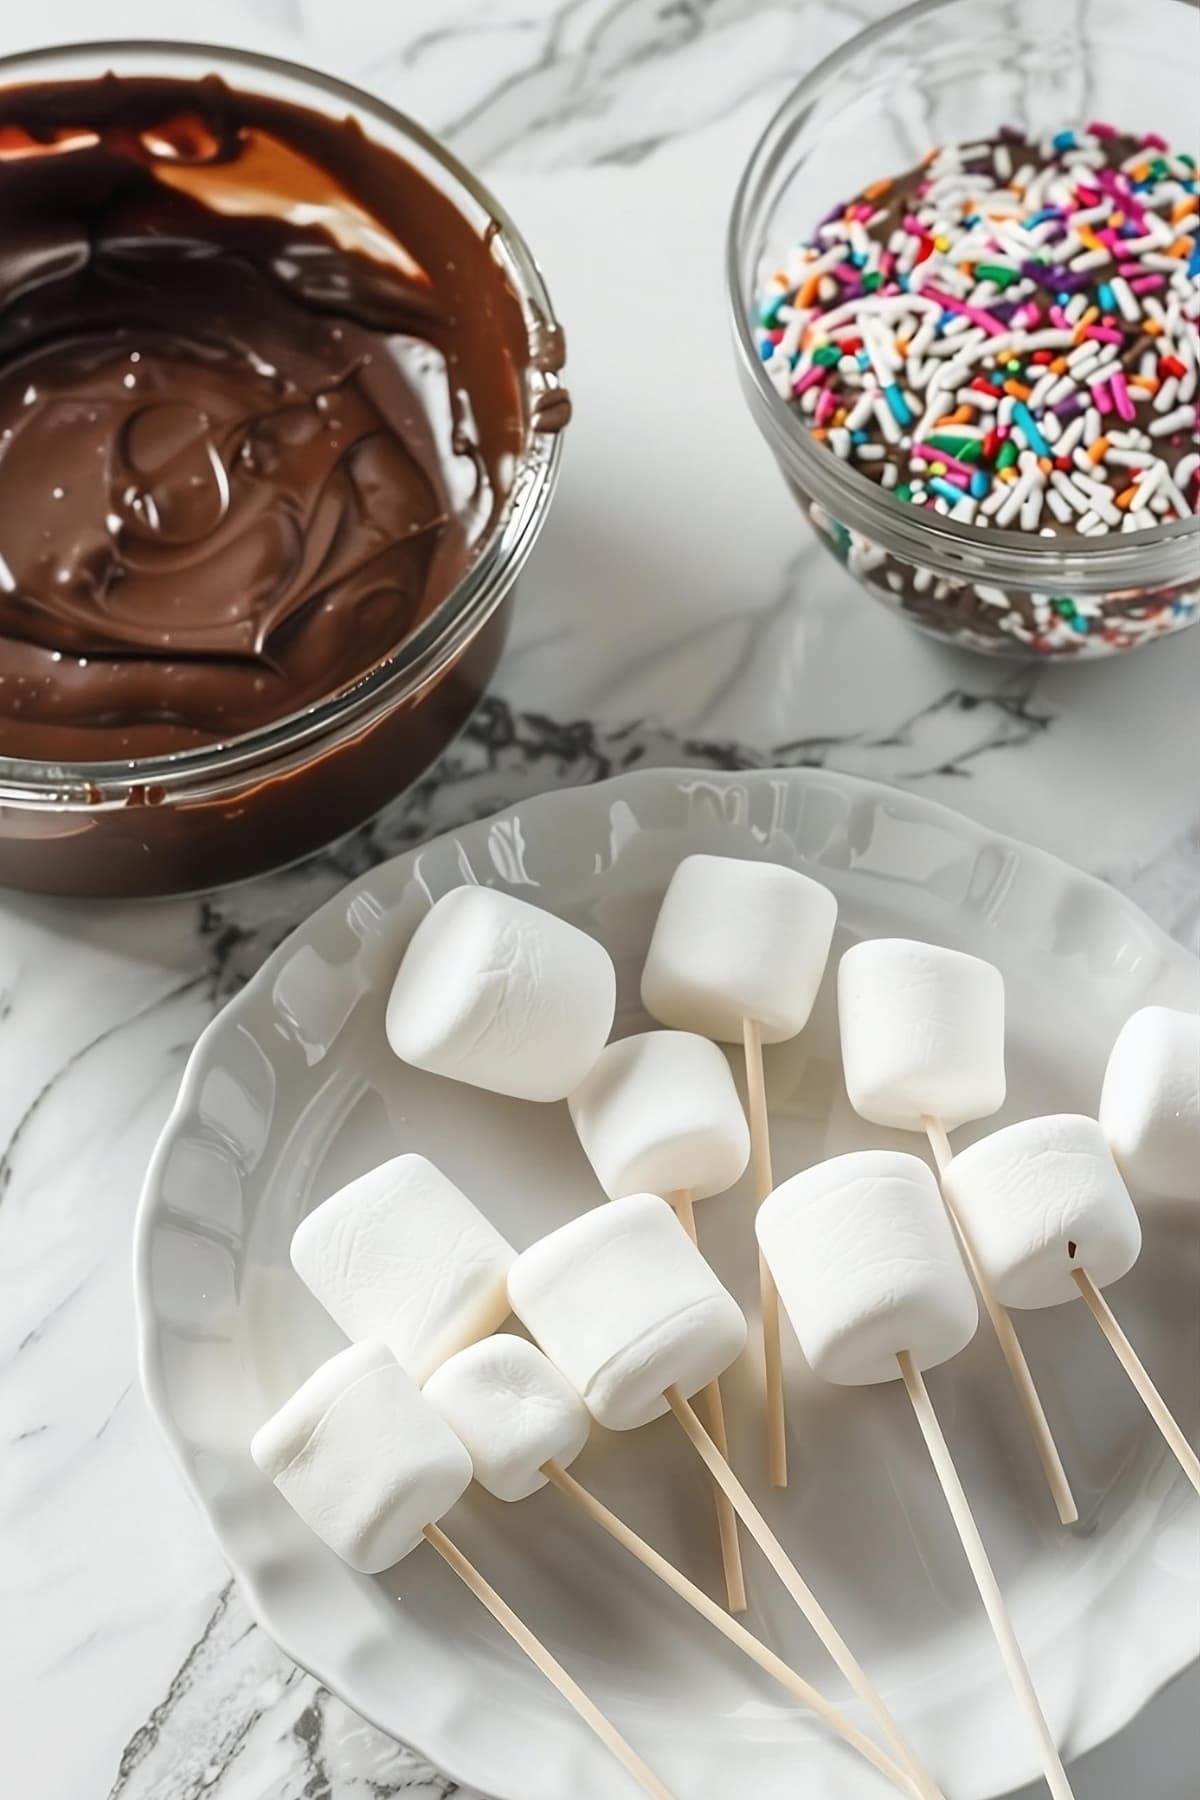 Marshmallows on stick, melted chocolate and sprinkles on glass bowls.